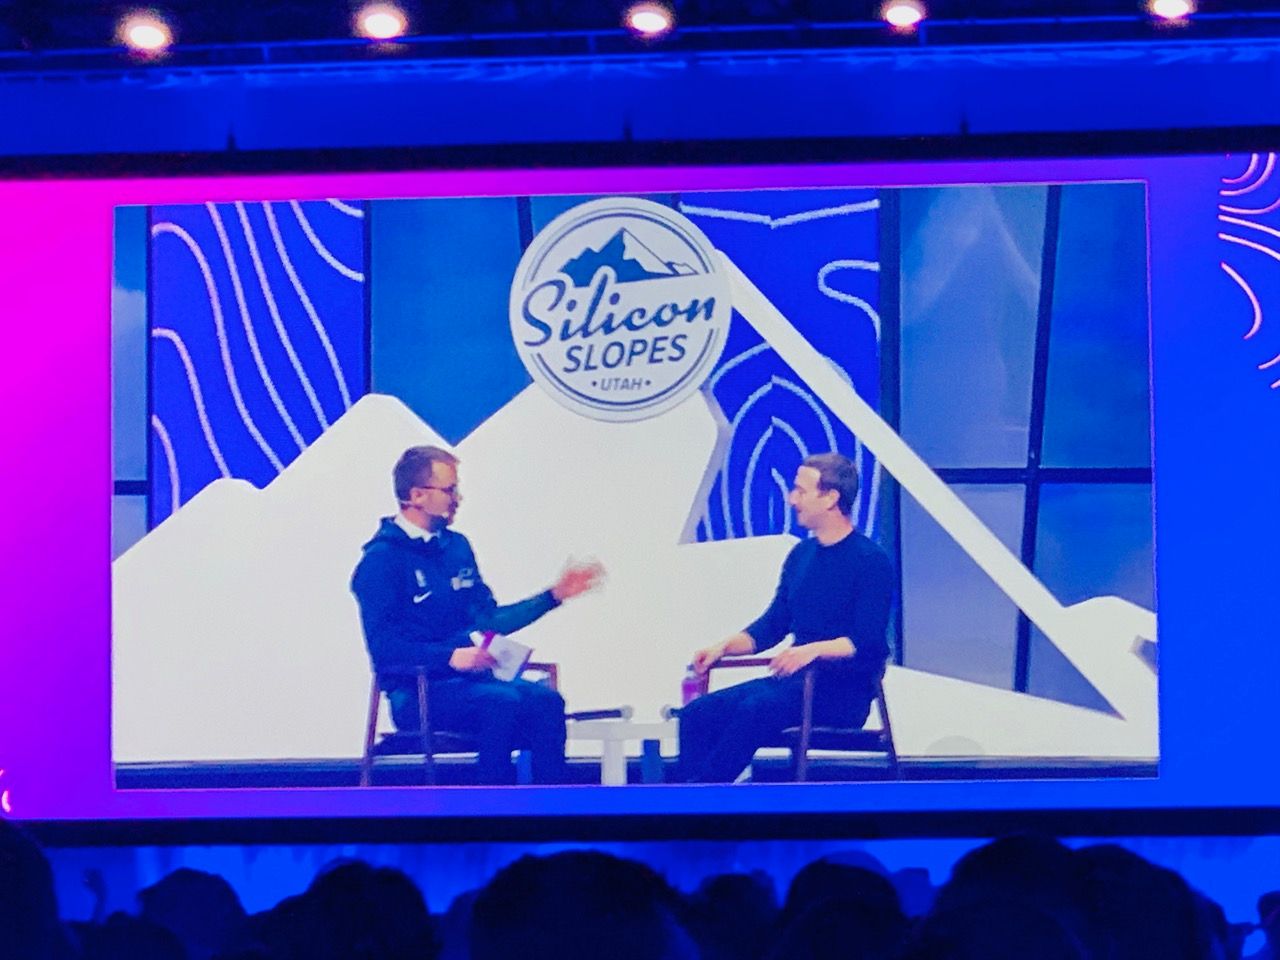 Silicon Slopes Executive Director Clint Betts interviewing Mark Zuckerberg by Clark Newell